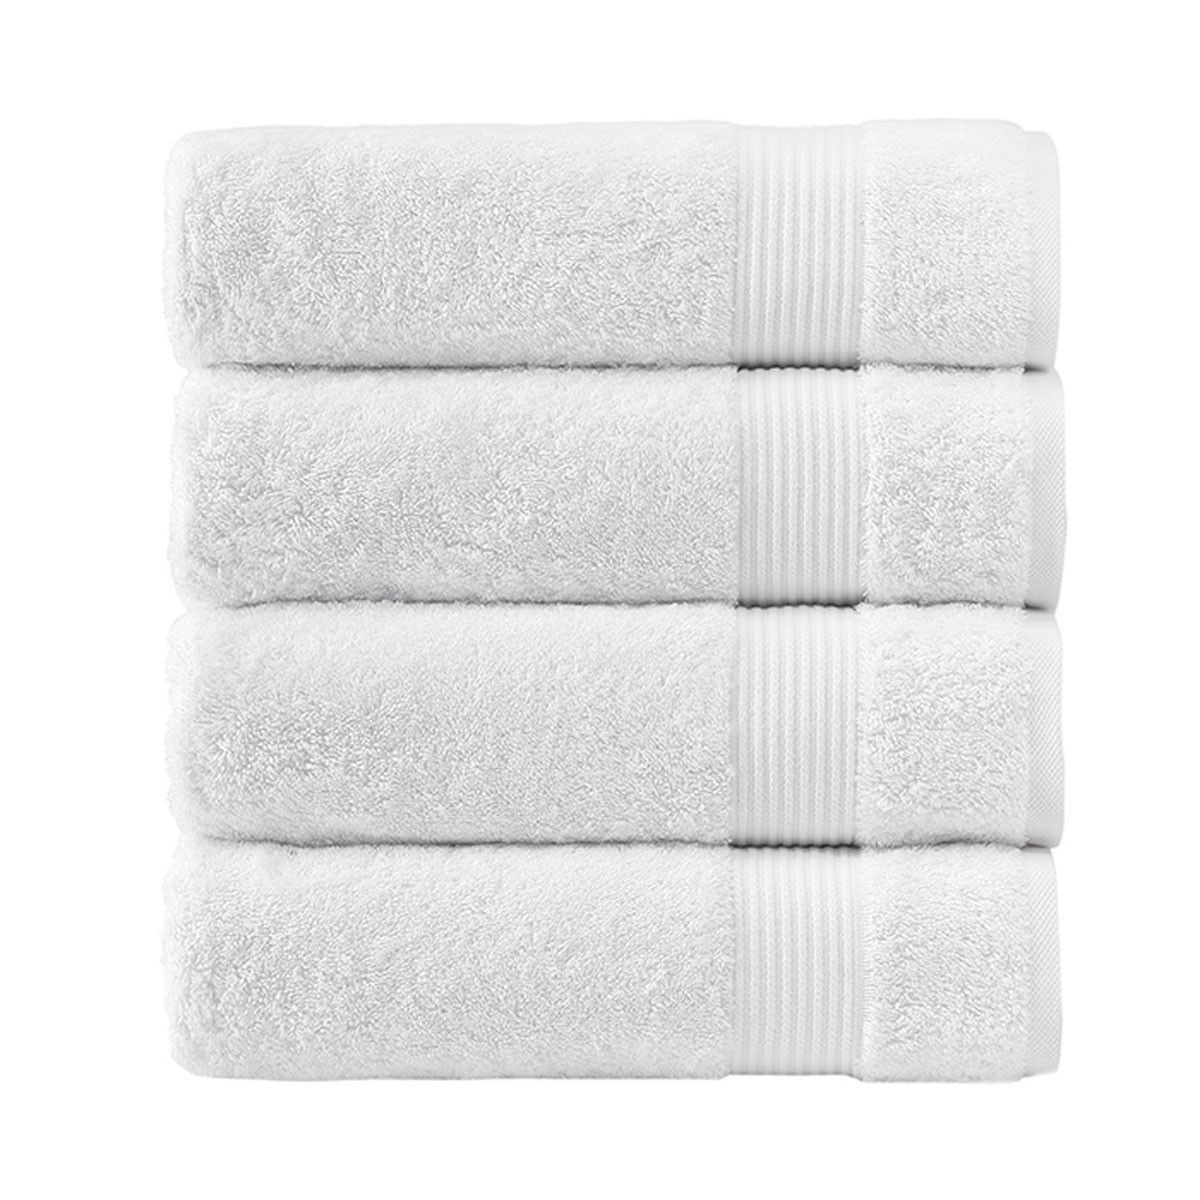 What items are part of the Amadeus Turkish White Towel Collection set alongside bulk Turkish blankets?